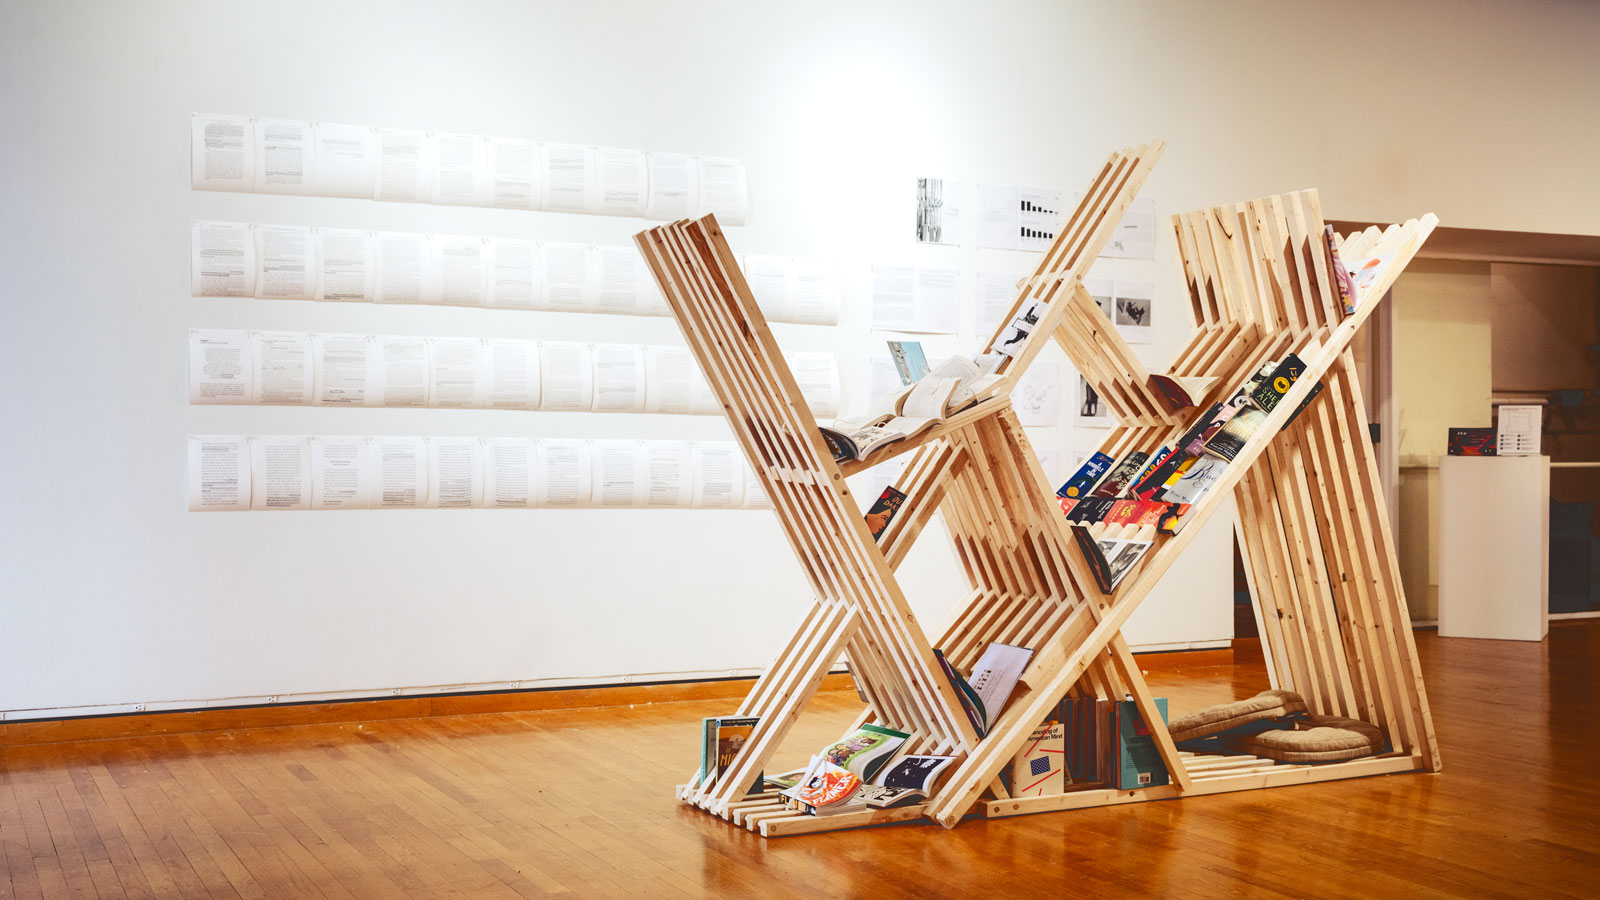 A wooden sculpture holding reading material, comprising the work "Bookmark for Freedom Pages"